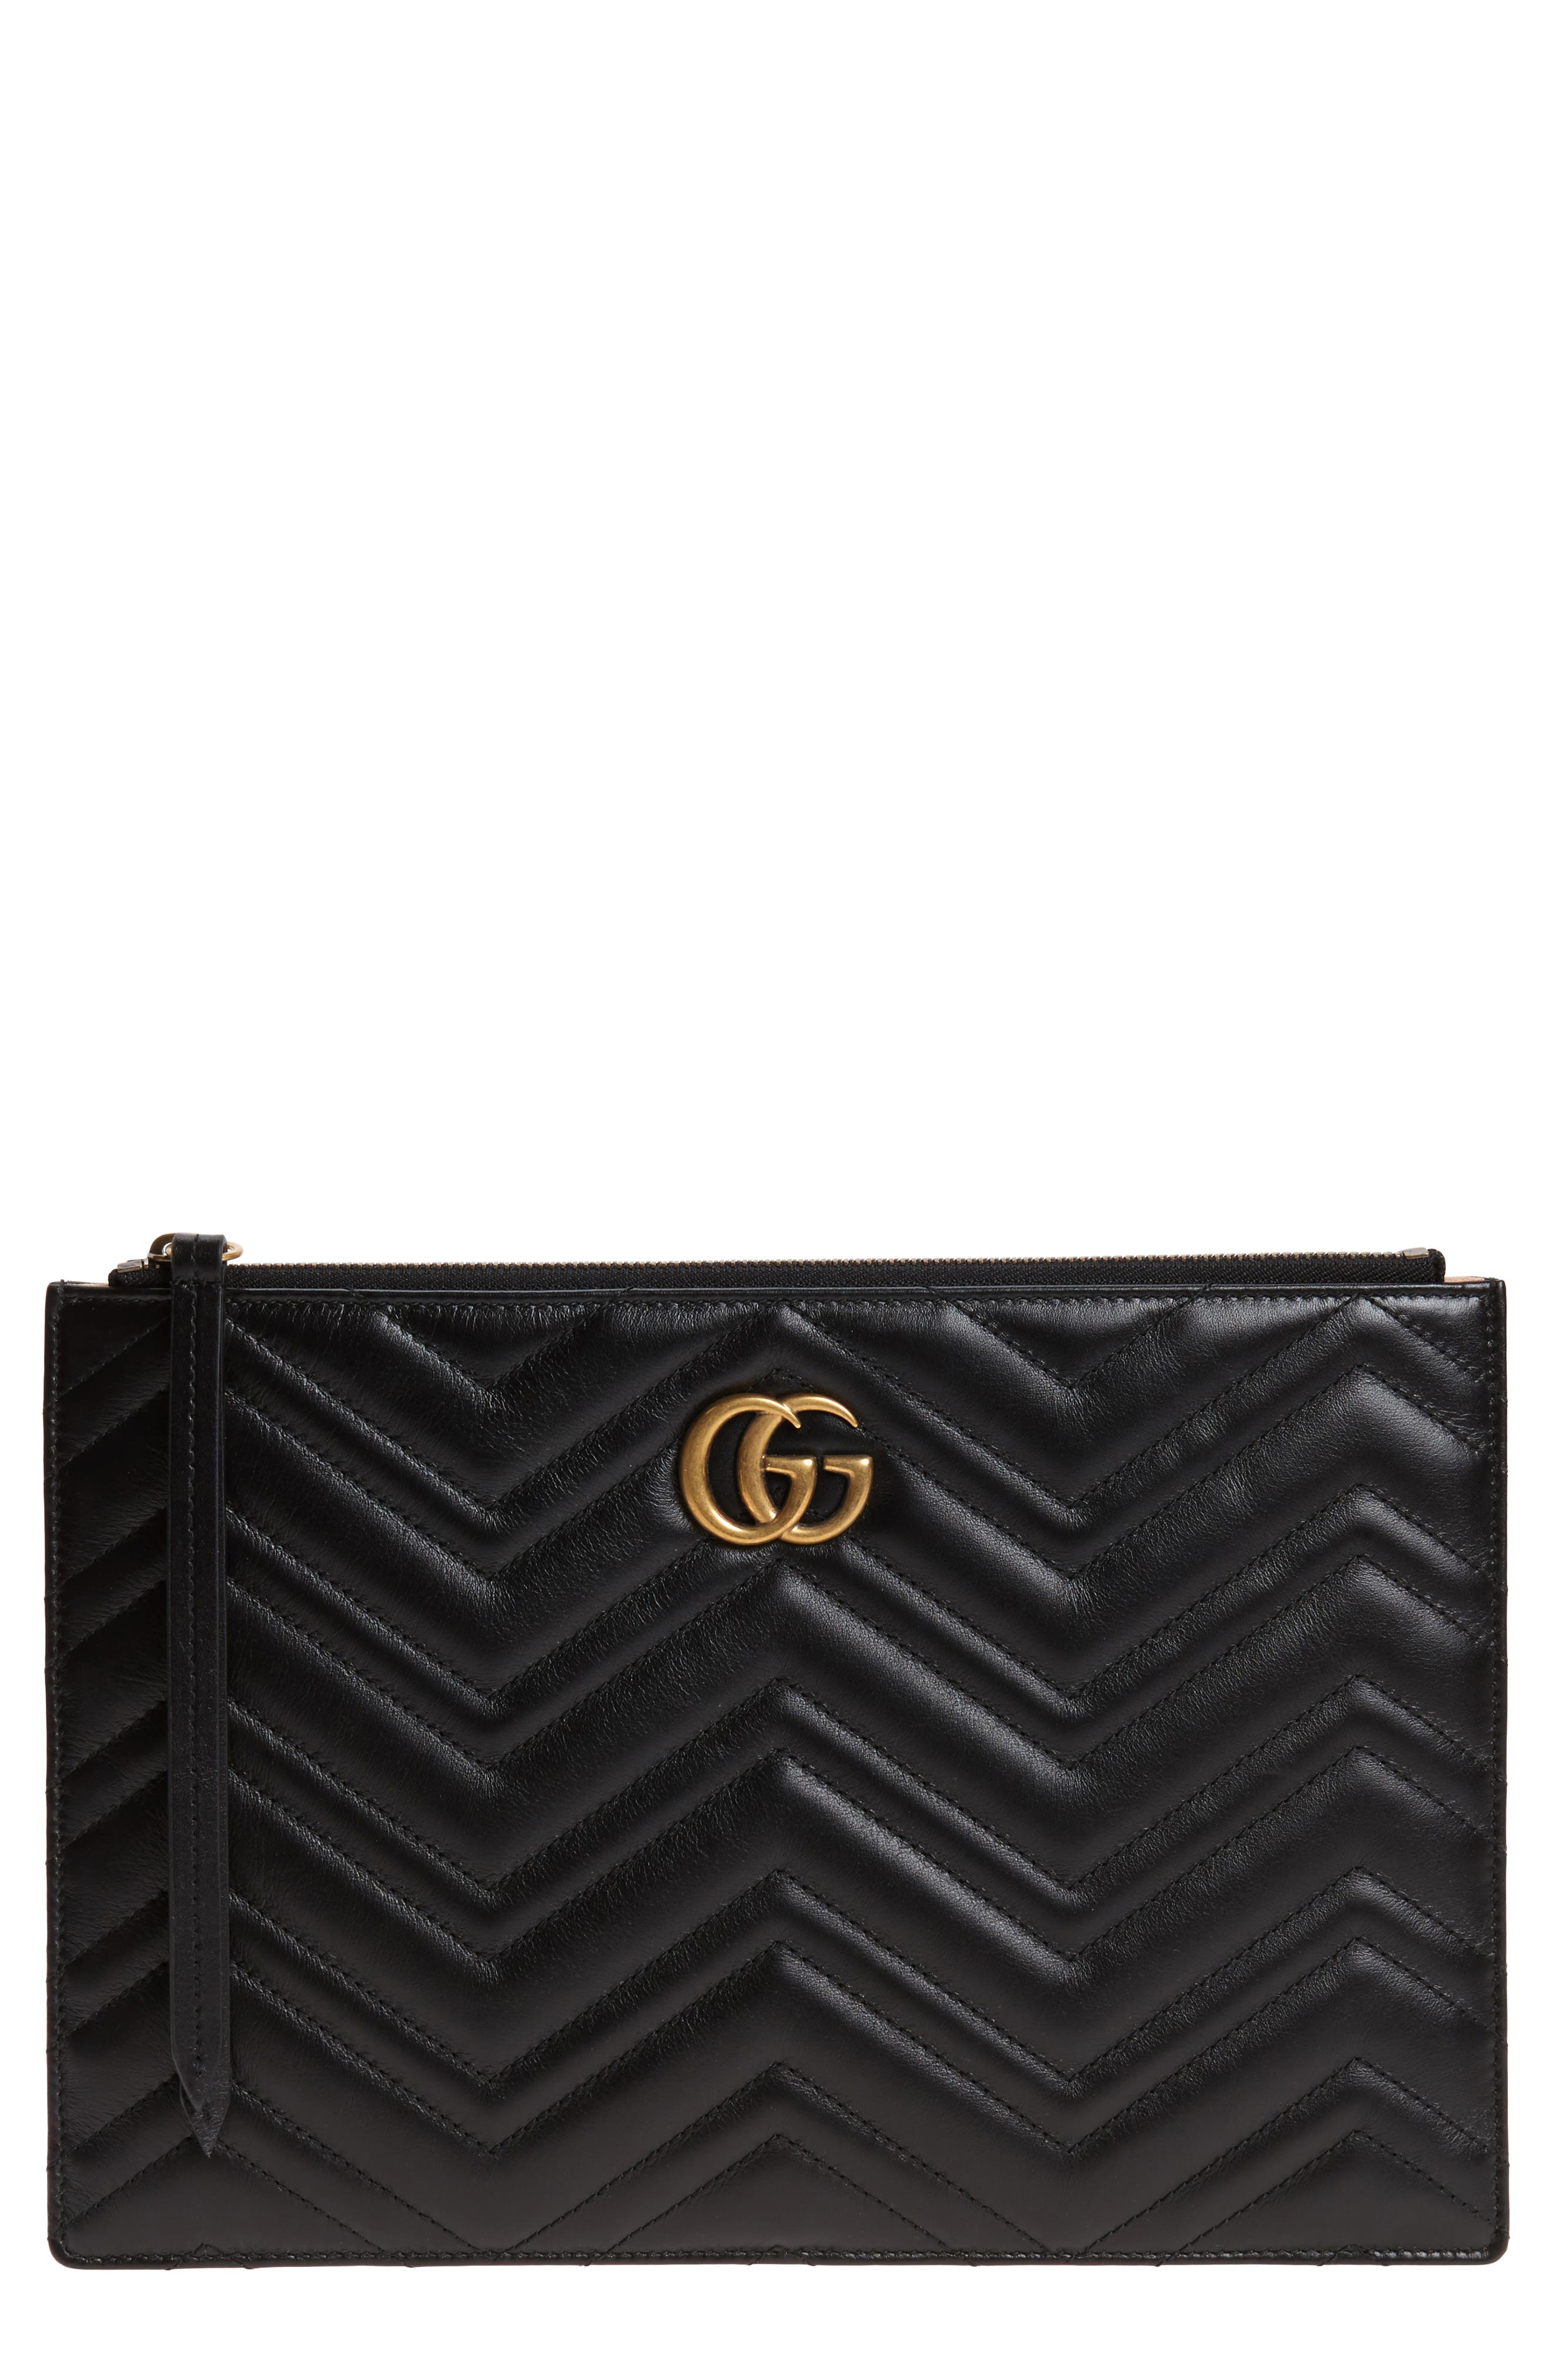 gucci marmont leather